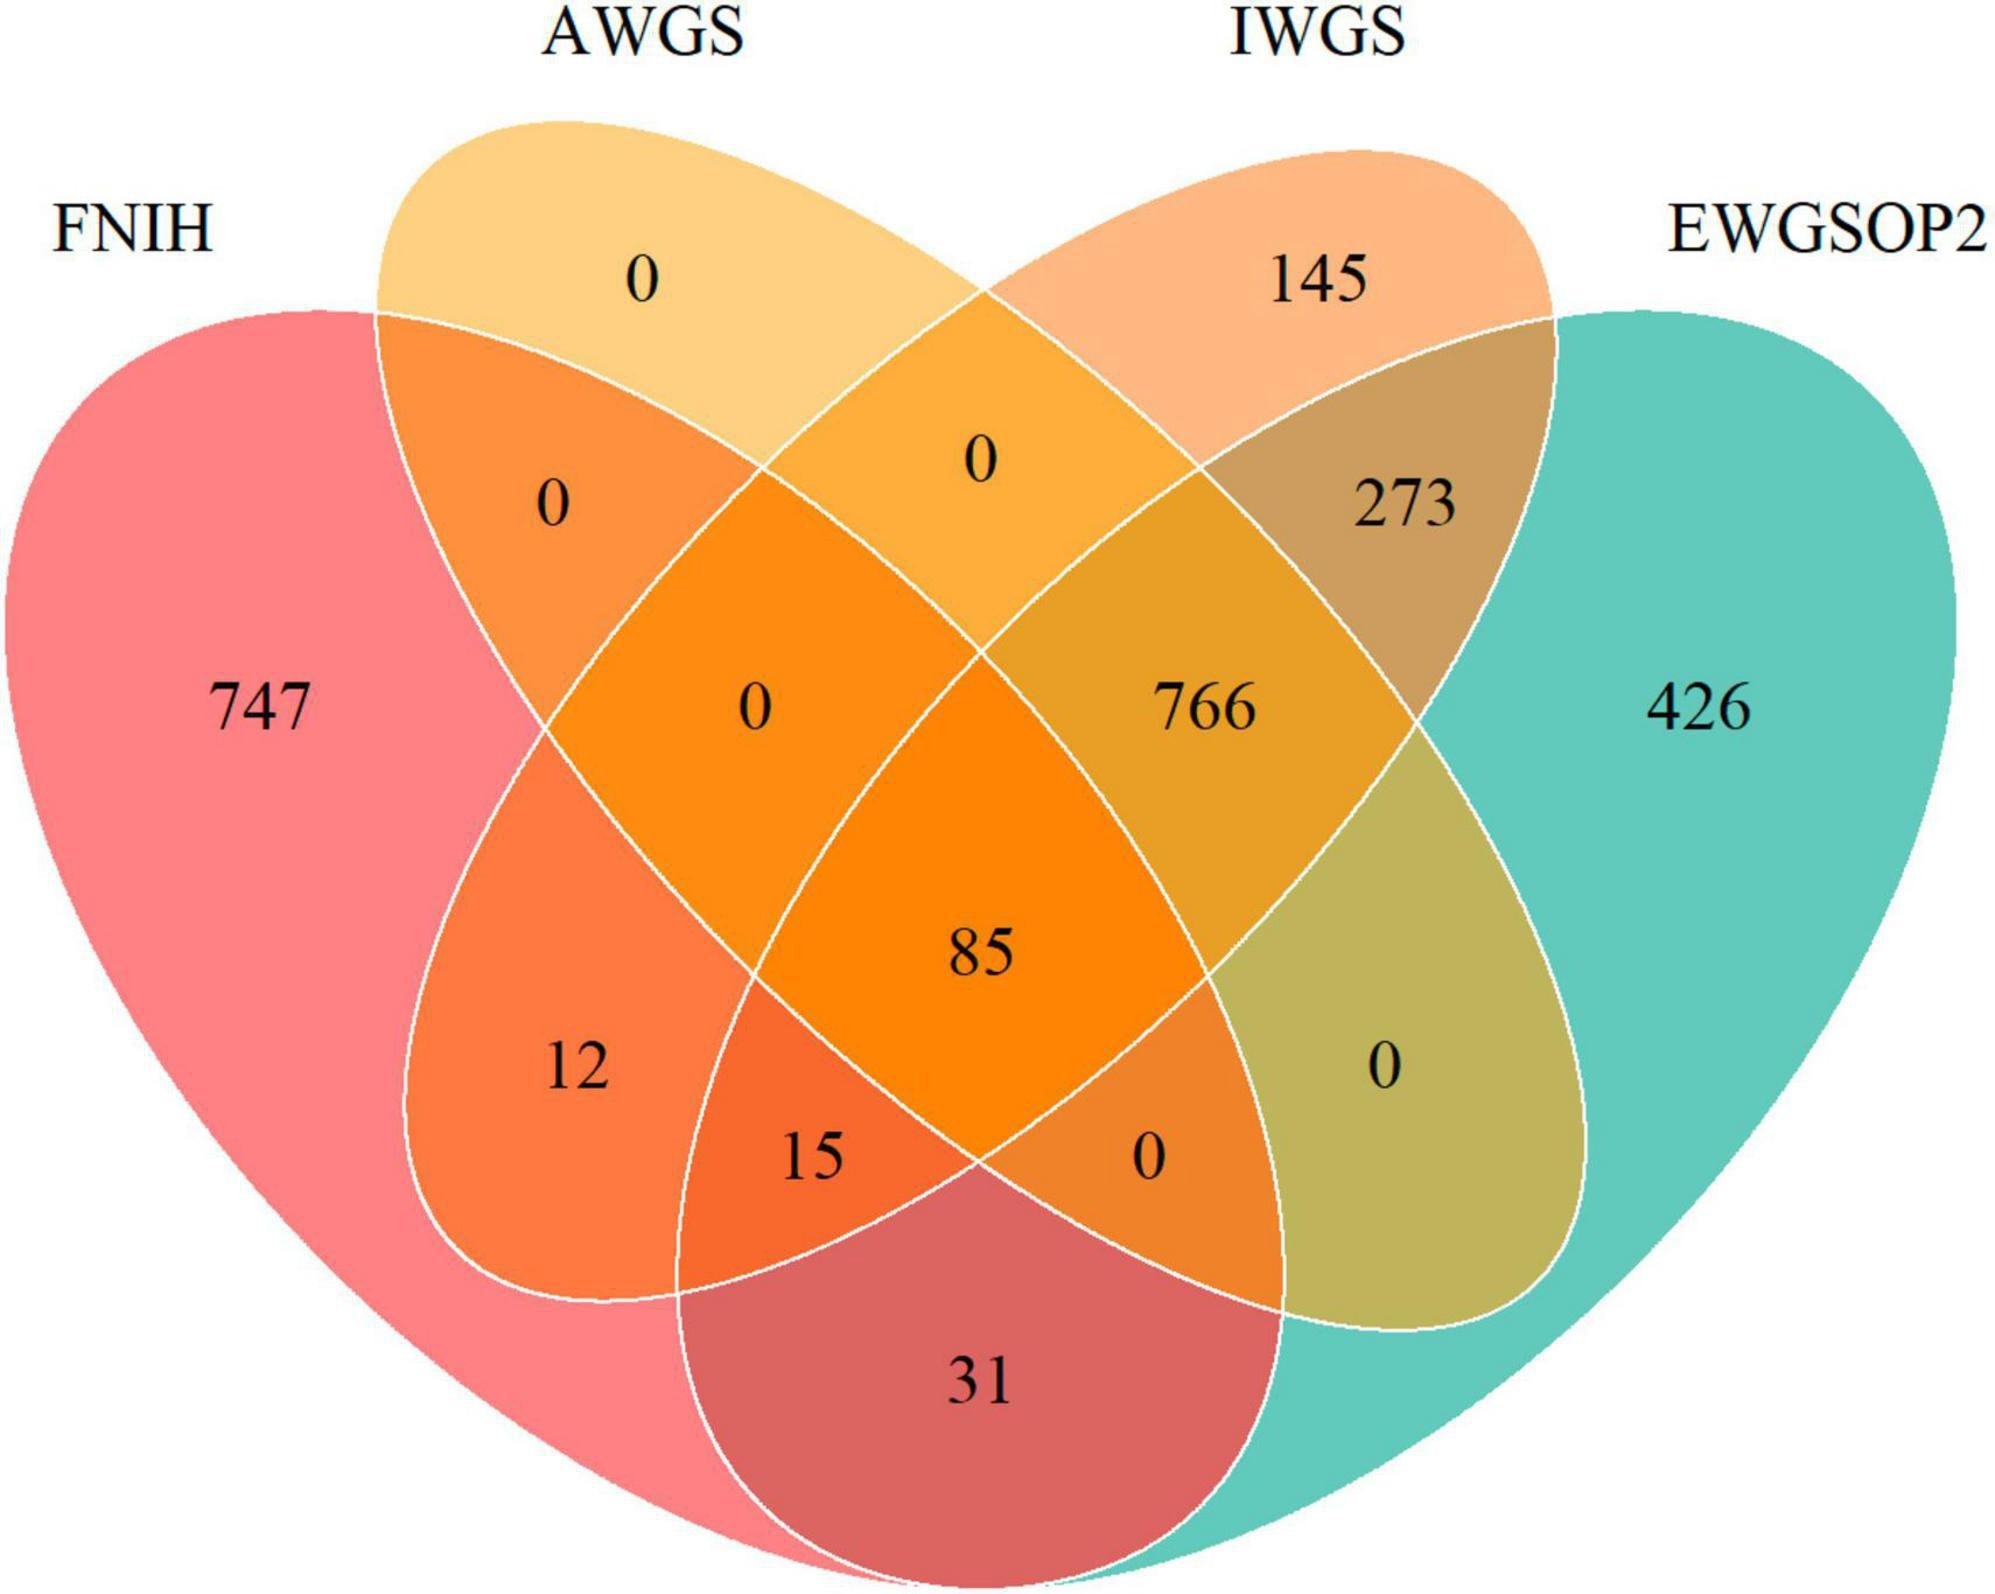 Venn diagram showing the overlap of prevalence of low muscle mass by different definitions of FNIH, EWGSOP2, AWGS, and IWGS.